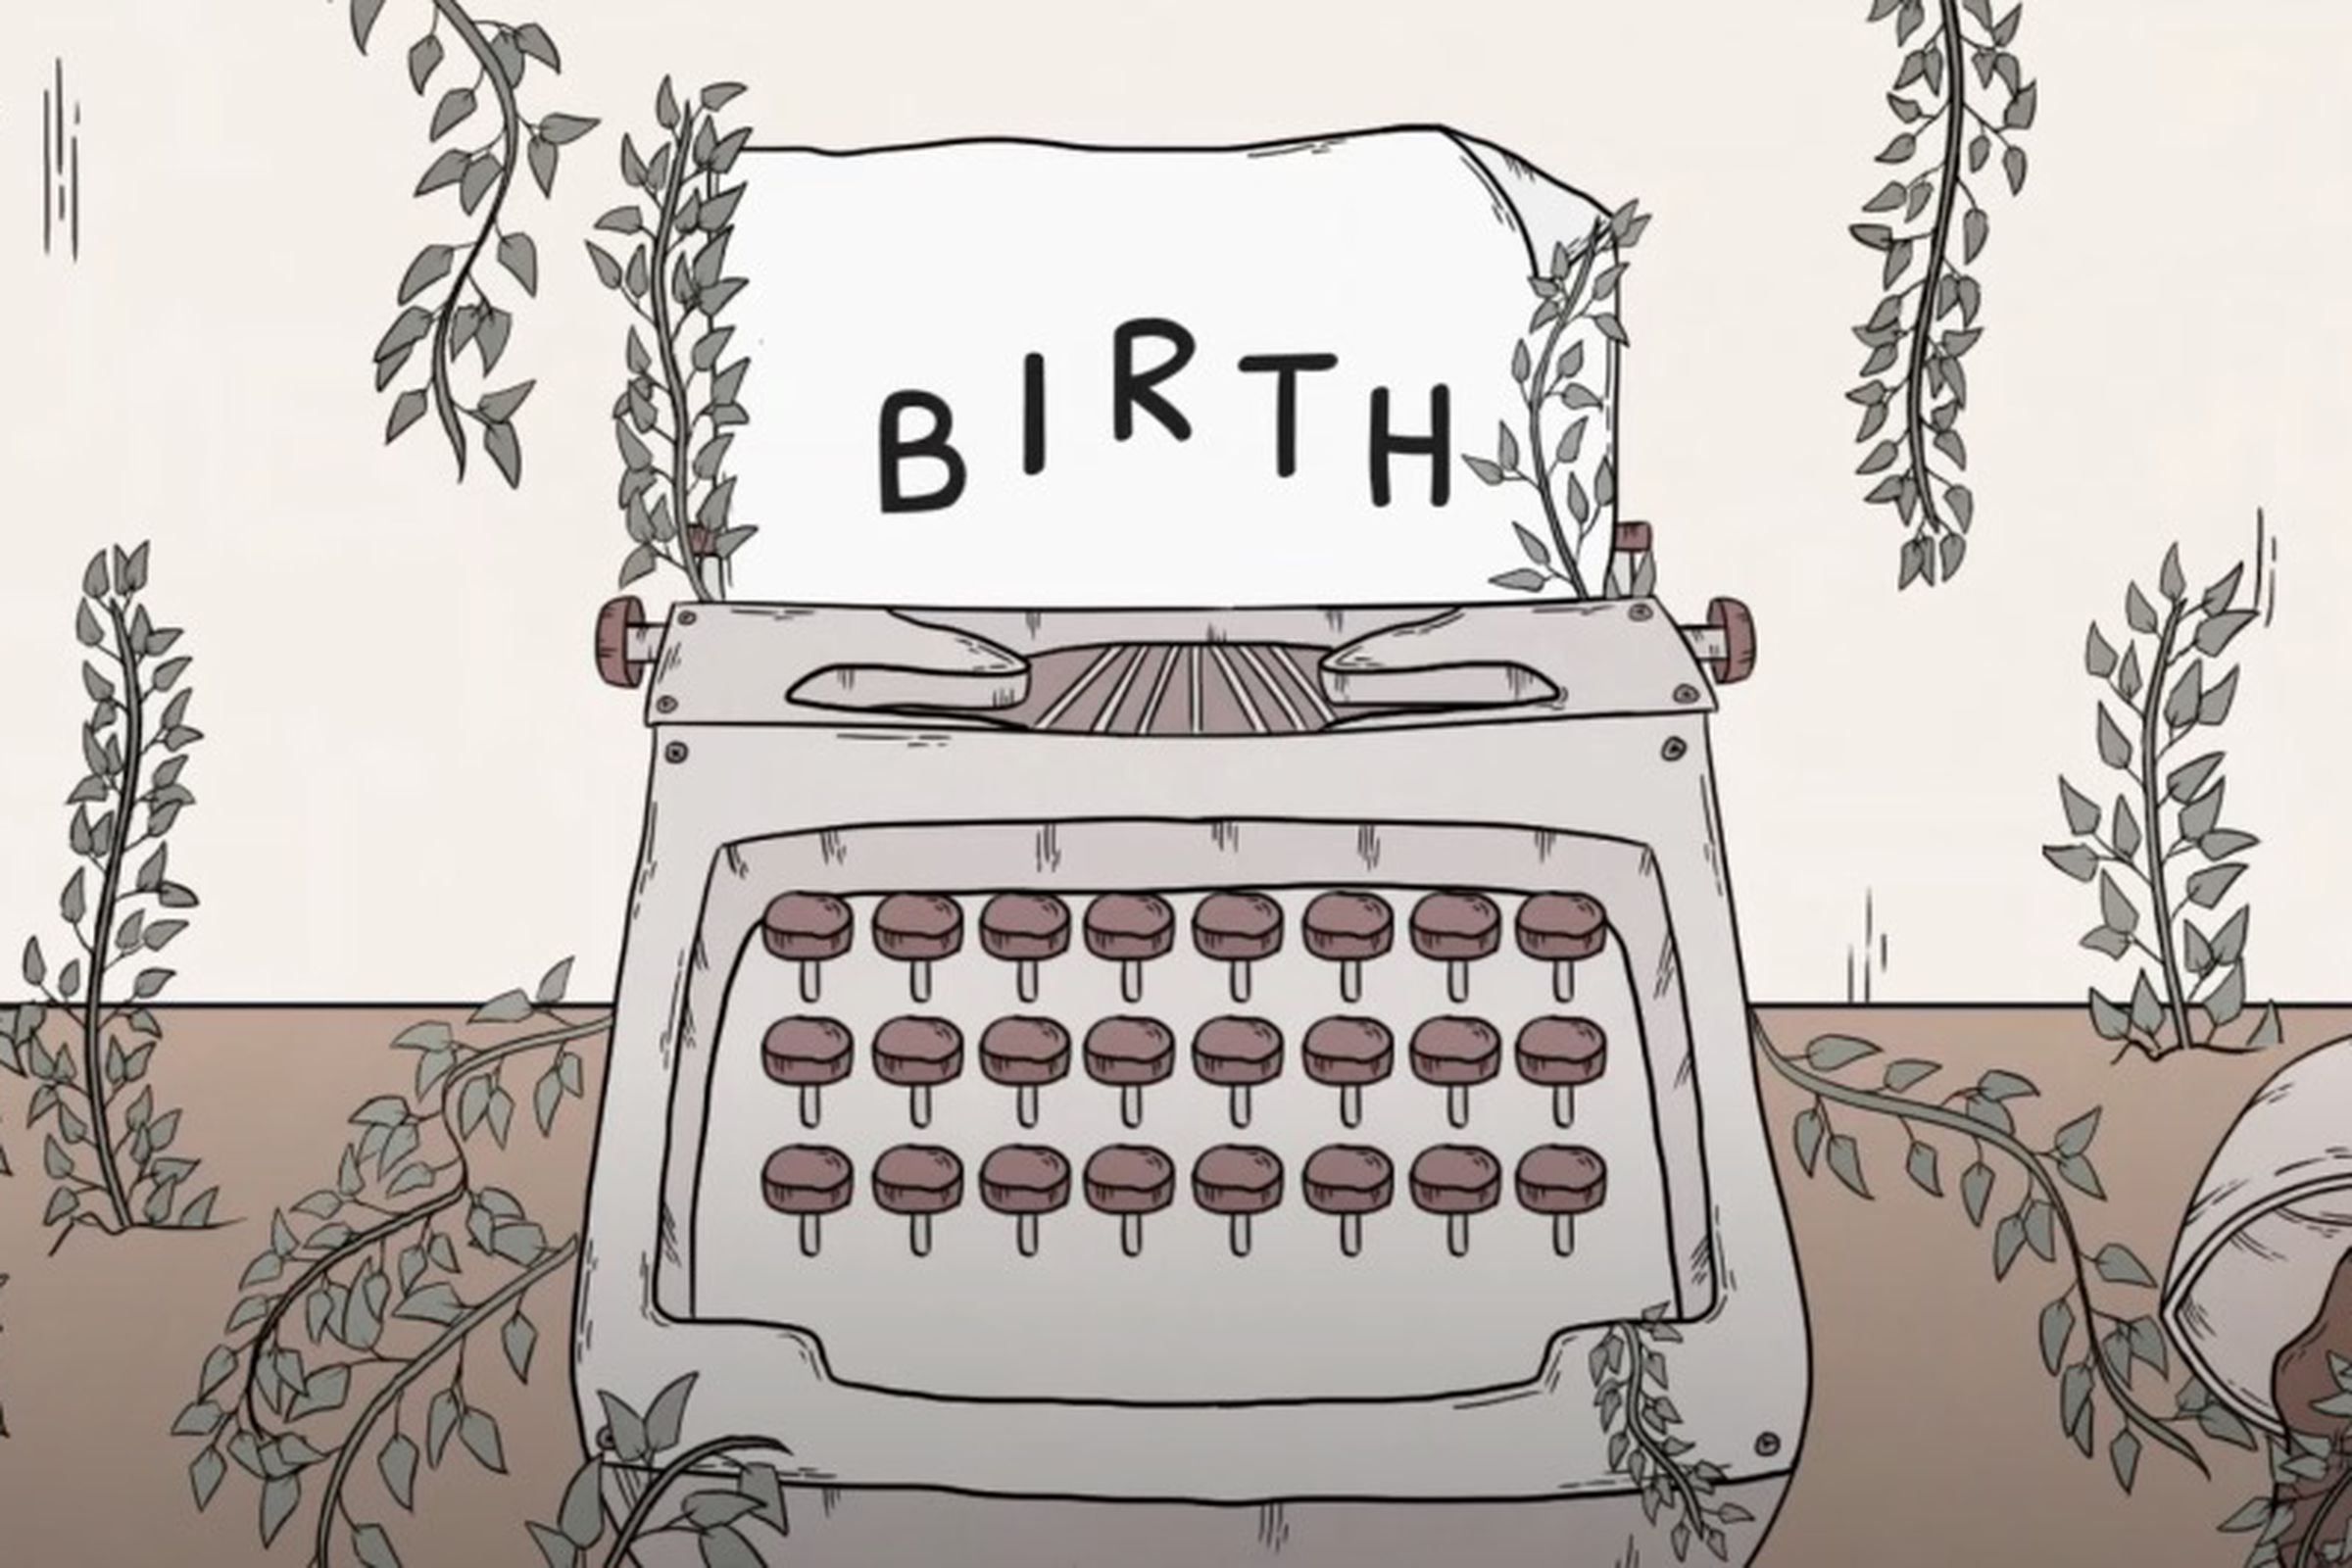 An illustration of a typewriter covered in vines, the word “BIRTH” appears on a page inserted in the typewriter.